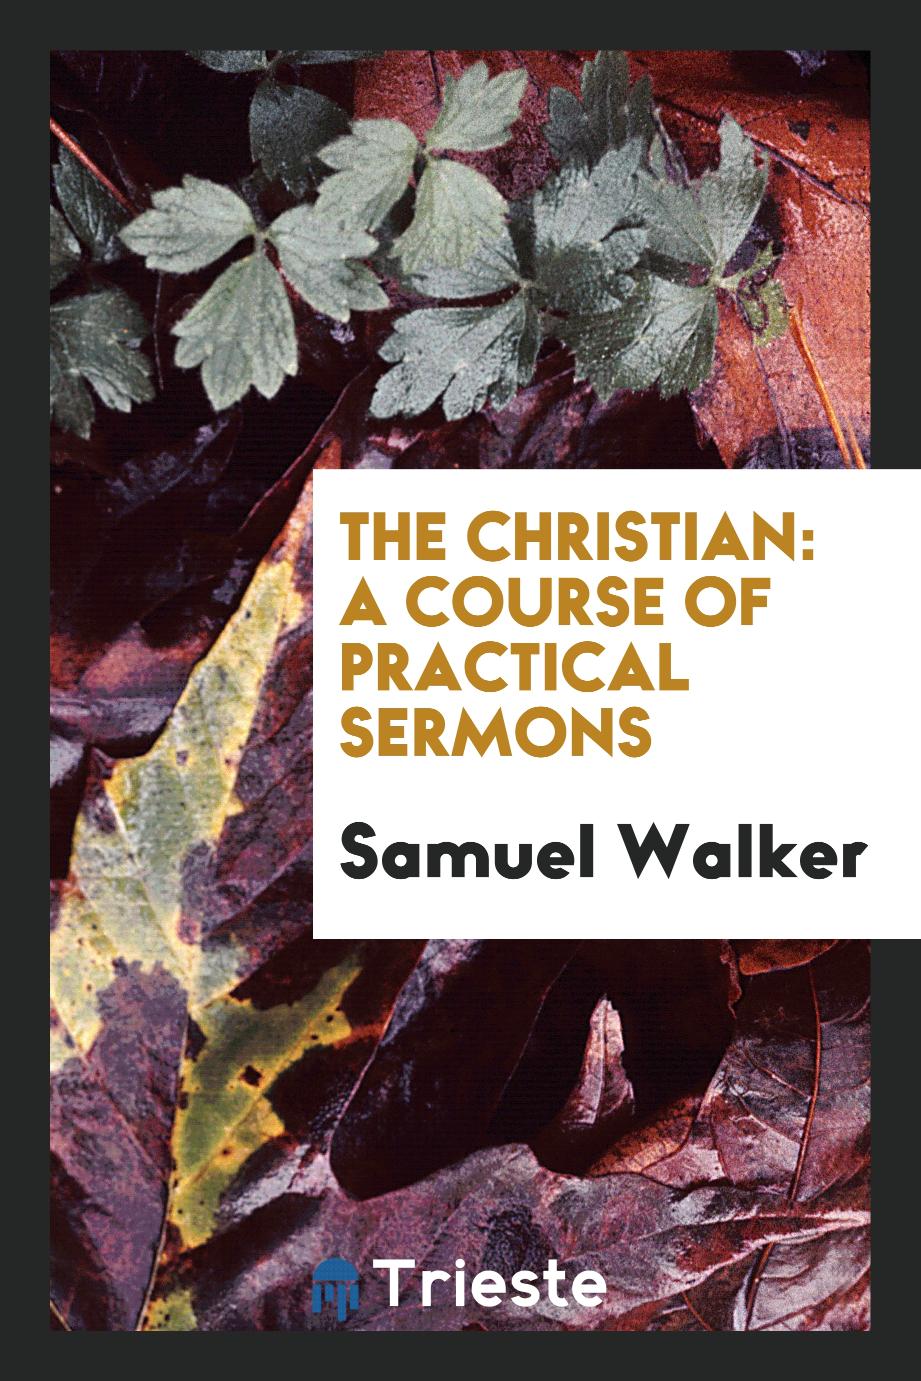 The Christian: a course of practical sermons